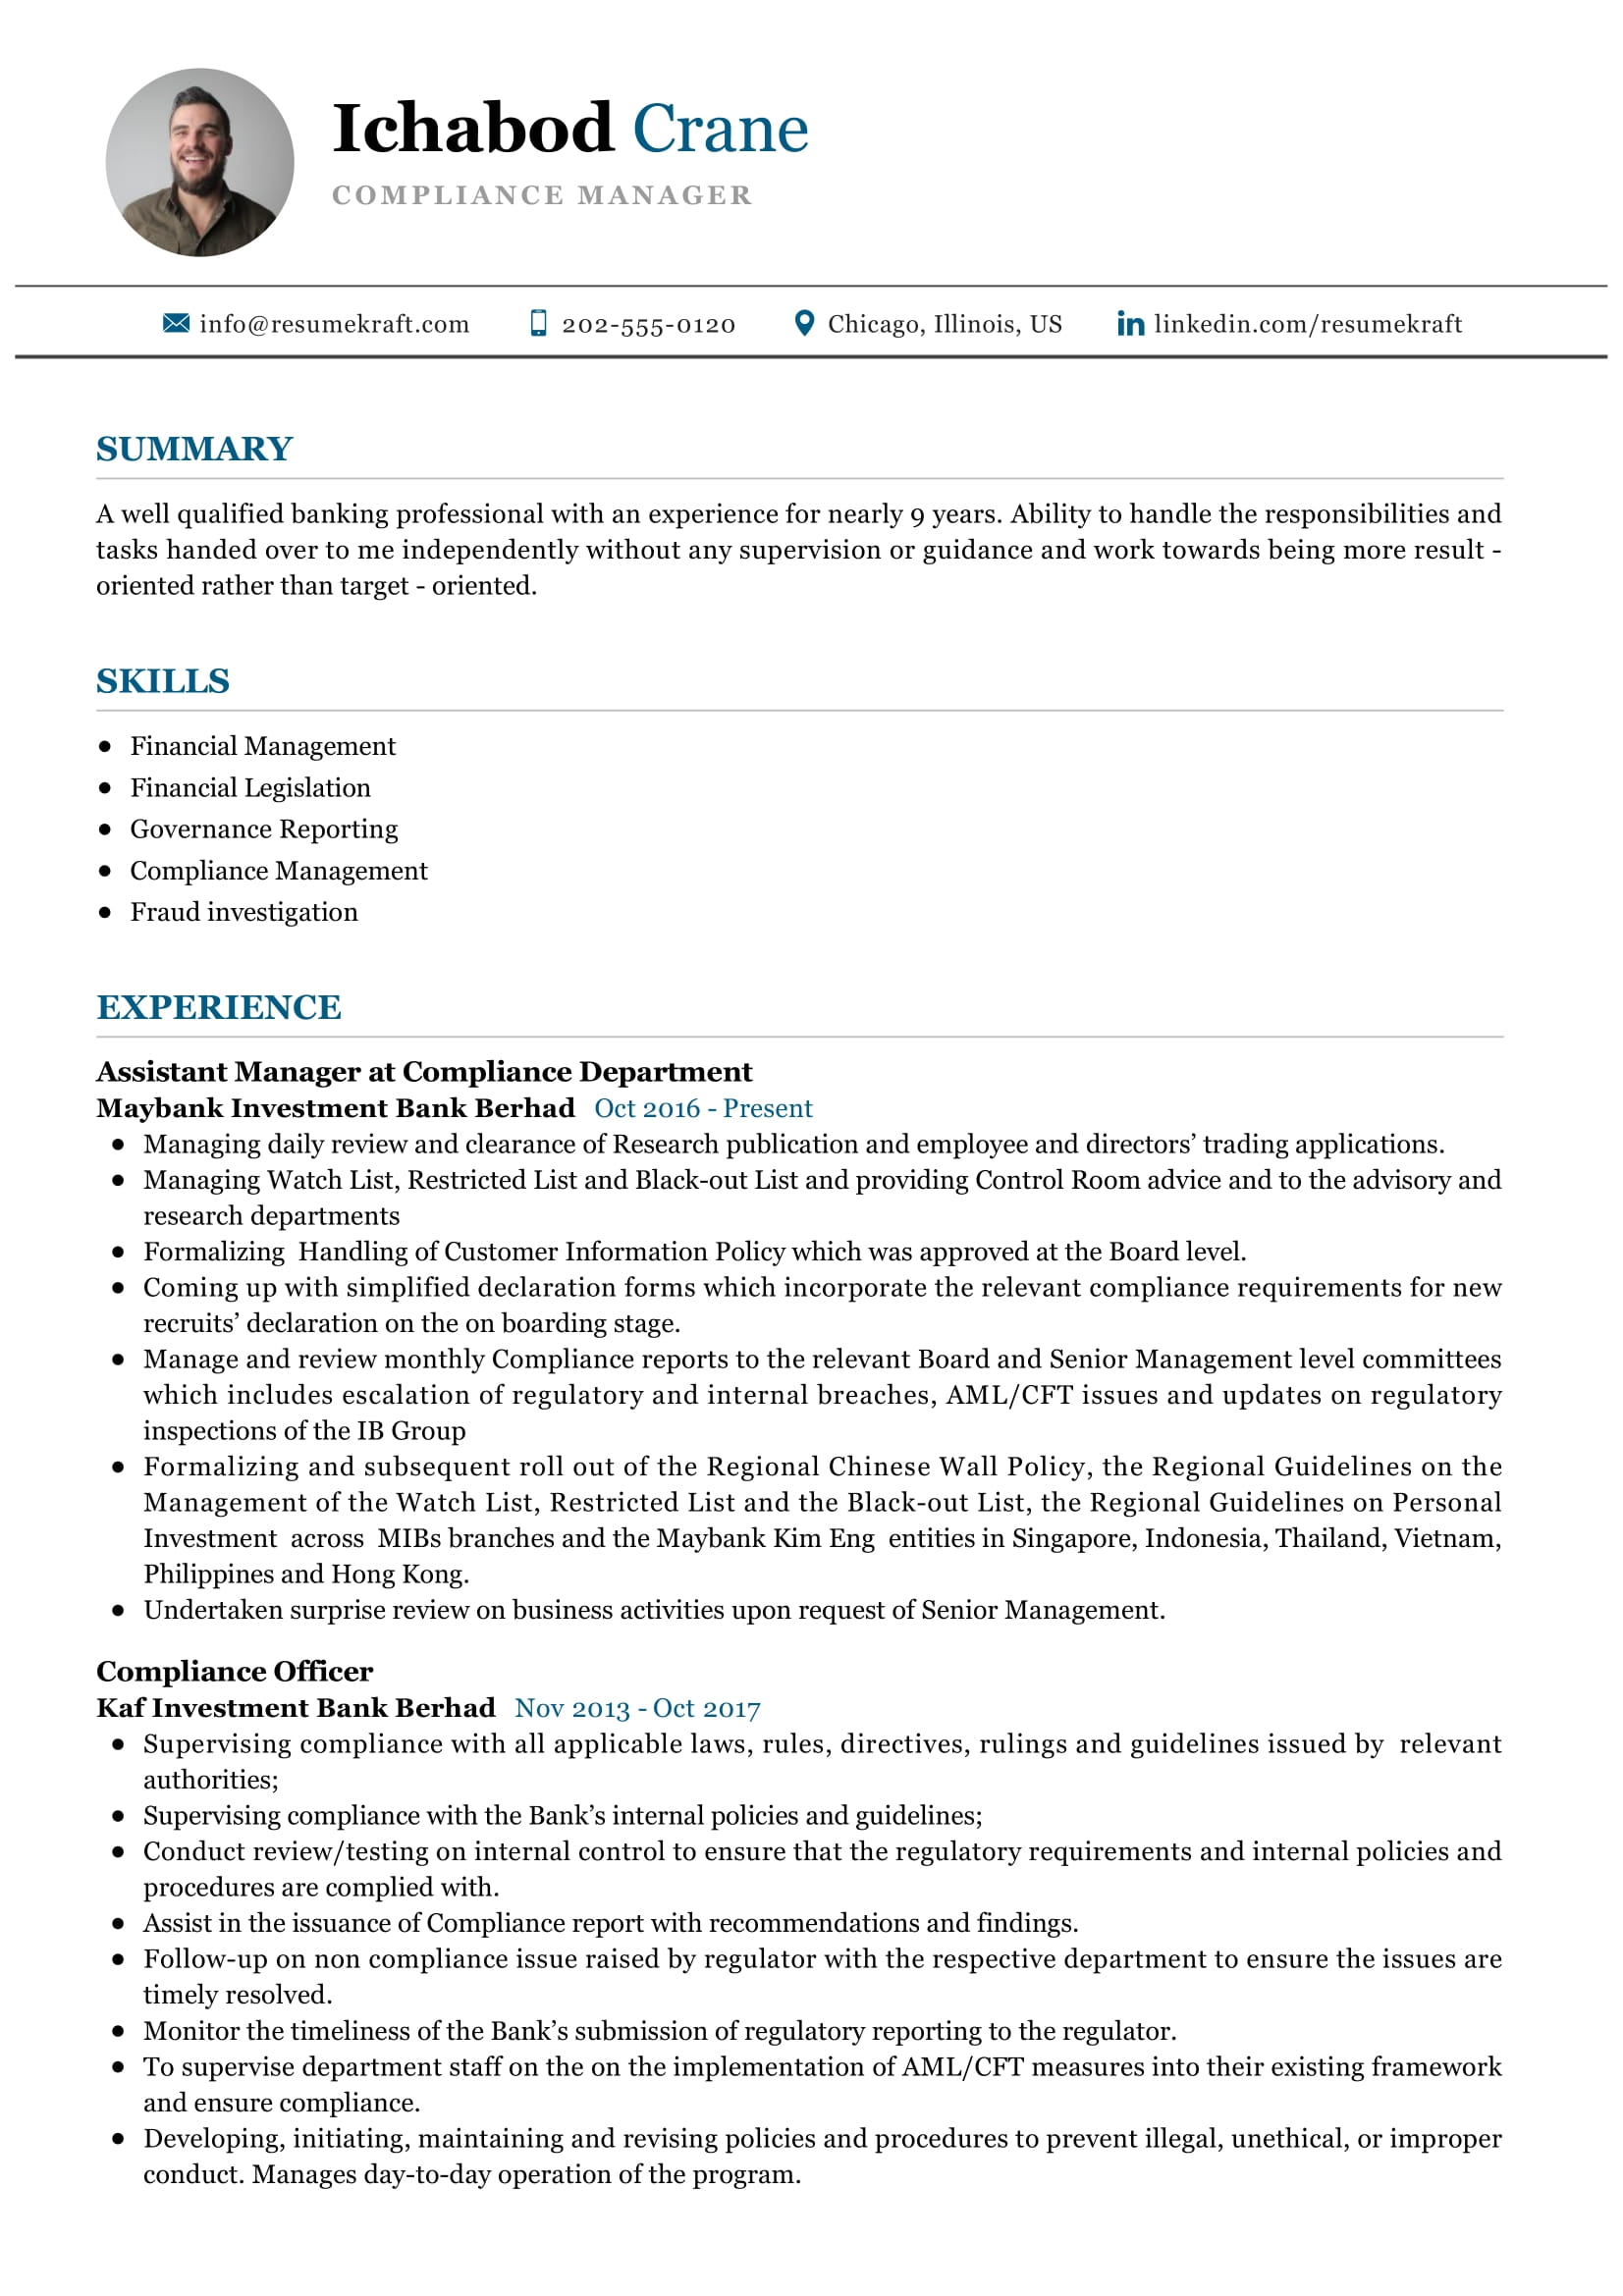 hr compliance resume format india